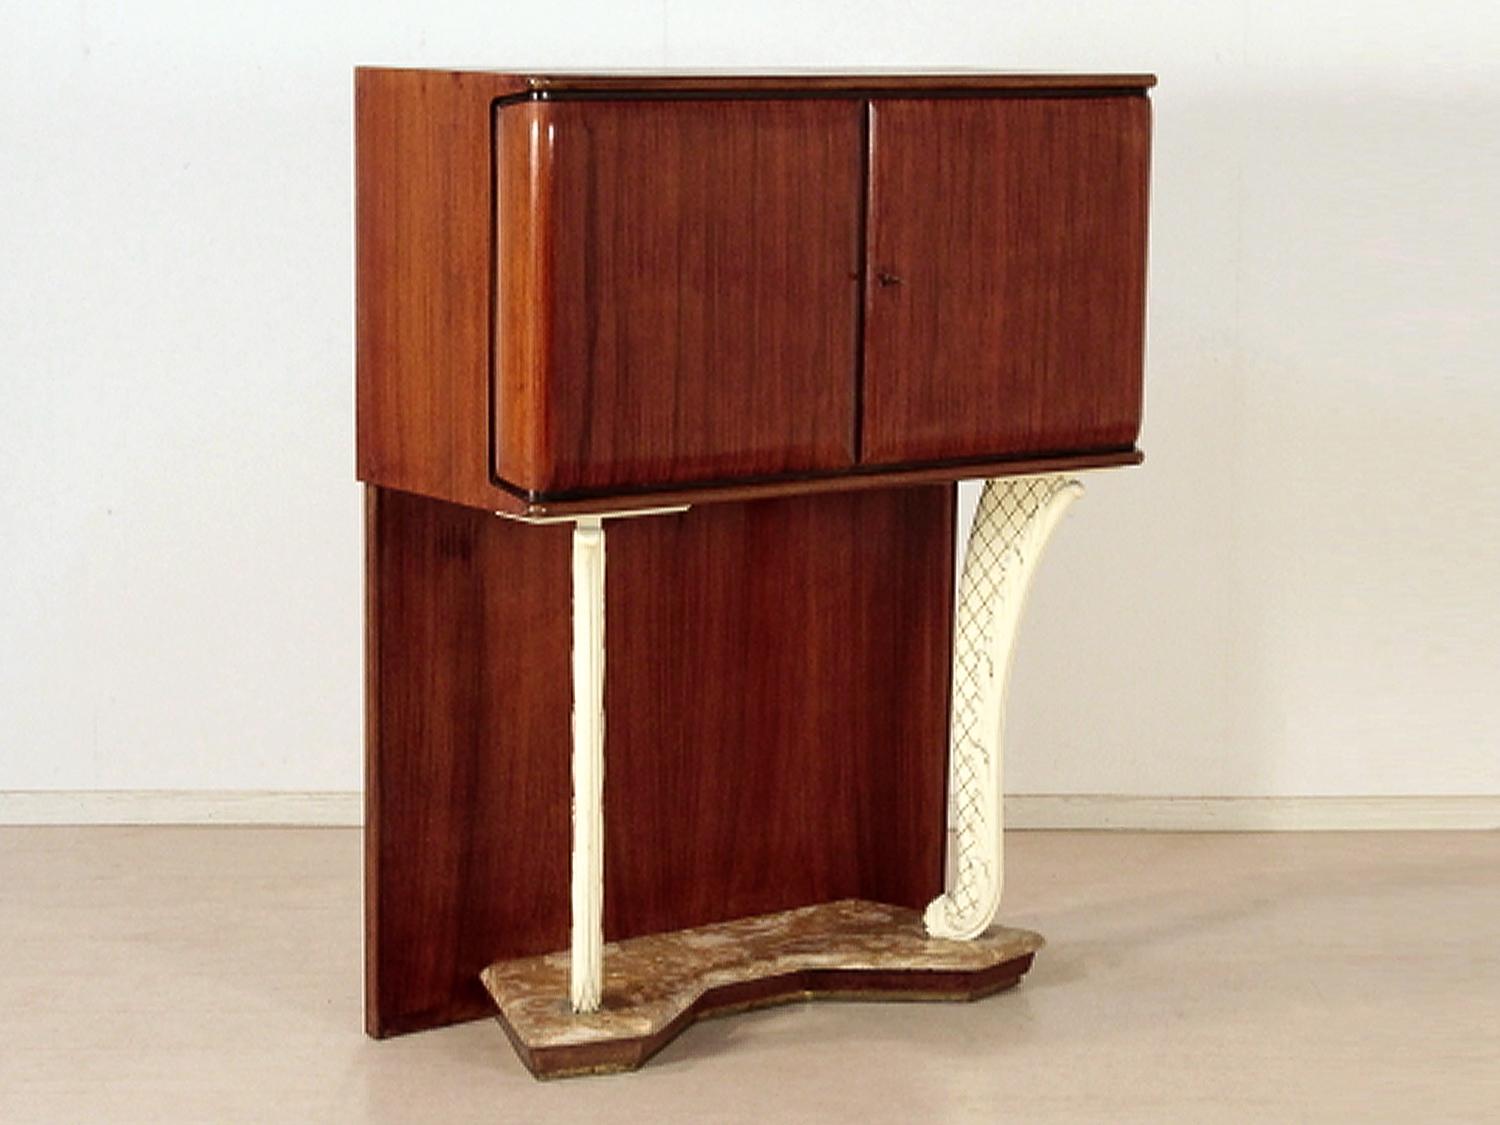 Italian mid-century mahogany wetbar, designed in the style of Vittorio Dassi in the 1950s.
The cabinet hiding a glass shelf with mirror on the back and is equipped with an internal lighting system, opening the two doors turns on automatically,